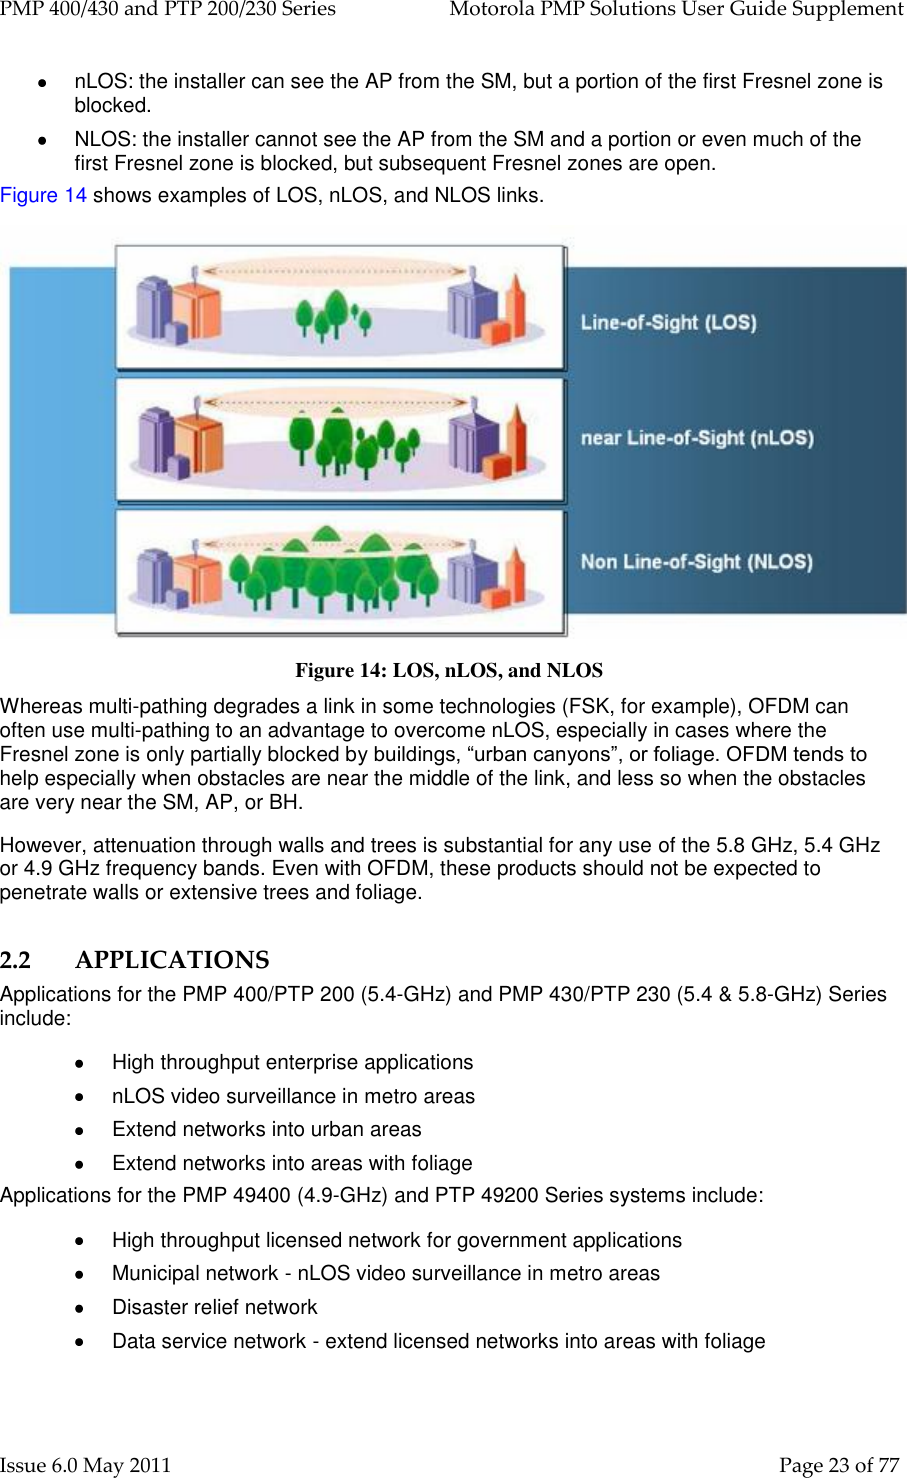 PMP 400/430 and PTP 200/230 Series   Motorola PMP Solutions User Guide Supplement Issue 6.0 May 2011    Page 23 of 77   nLOS: the installer can see the AP from the SM, but a portion of the first Fresnel zone is blocked.   NLOS: the installer cannot see the AP from the SM and a portion or even much of the first Fresnel zone is blocked, but subsequent Fresnel zones are open. Figure 14 shows examples of LOS, nLOS, and NLOS links.  Figure 14: LOS, nLOS, and NLOS Whereas multi-pathing degrades a link in some technologies (FSK, for example), OFDM can often use multi-pathing to an advantage to overcome nLOS, especially in cases where the Fresnel zone is only partially blocked by buildings, “urban canyons”, or foliage. OFDM tends to help especially when obstacles are near the middle of the link, and less so when the obstacles are very near the SM, AP, or BH. However, attenuation through walls and trees is substantial for any use of the 5.8 GHz, 5.4 GHz or 4.9 GHz frequency bands. Even with OFDM, these products should not be expected to penetrate walls or extensive trees and foliage. 2.2 APPLICATIONS Applications for the PMP 400/PTP 200 (5.4-GHz) and PMP 430/PTP 230 (5.4 &amp; 5.8-GHz) Series include:   High throughput enterprise applications   nLOS video surveillance in metro areas   Extend networks into urban areas   Extend networks into areas with foliage Applications for the PMP 49400 (4.9-GHz) and PTP 49200 Series systems include:   High throughput licensed network for government applications   Municipal network - nLOS video surveillance in metro areas   Disaster relief network   Data service network - extend licensed networks into areas with foliage  